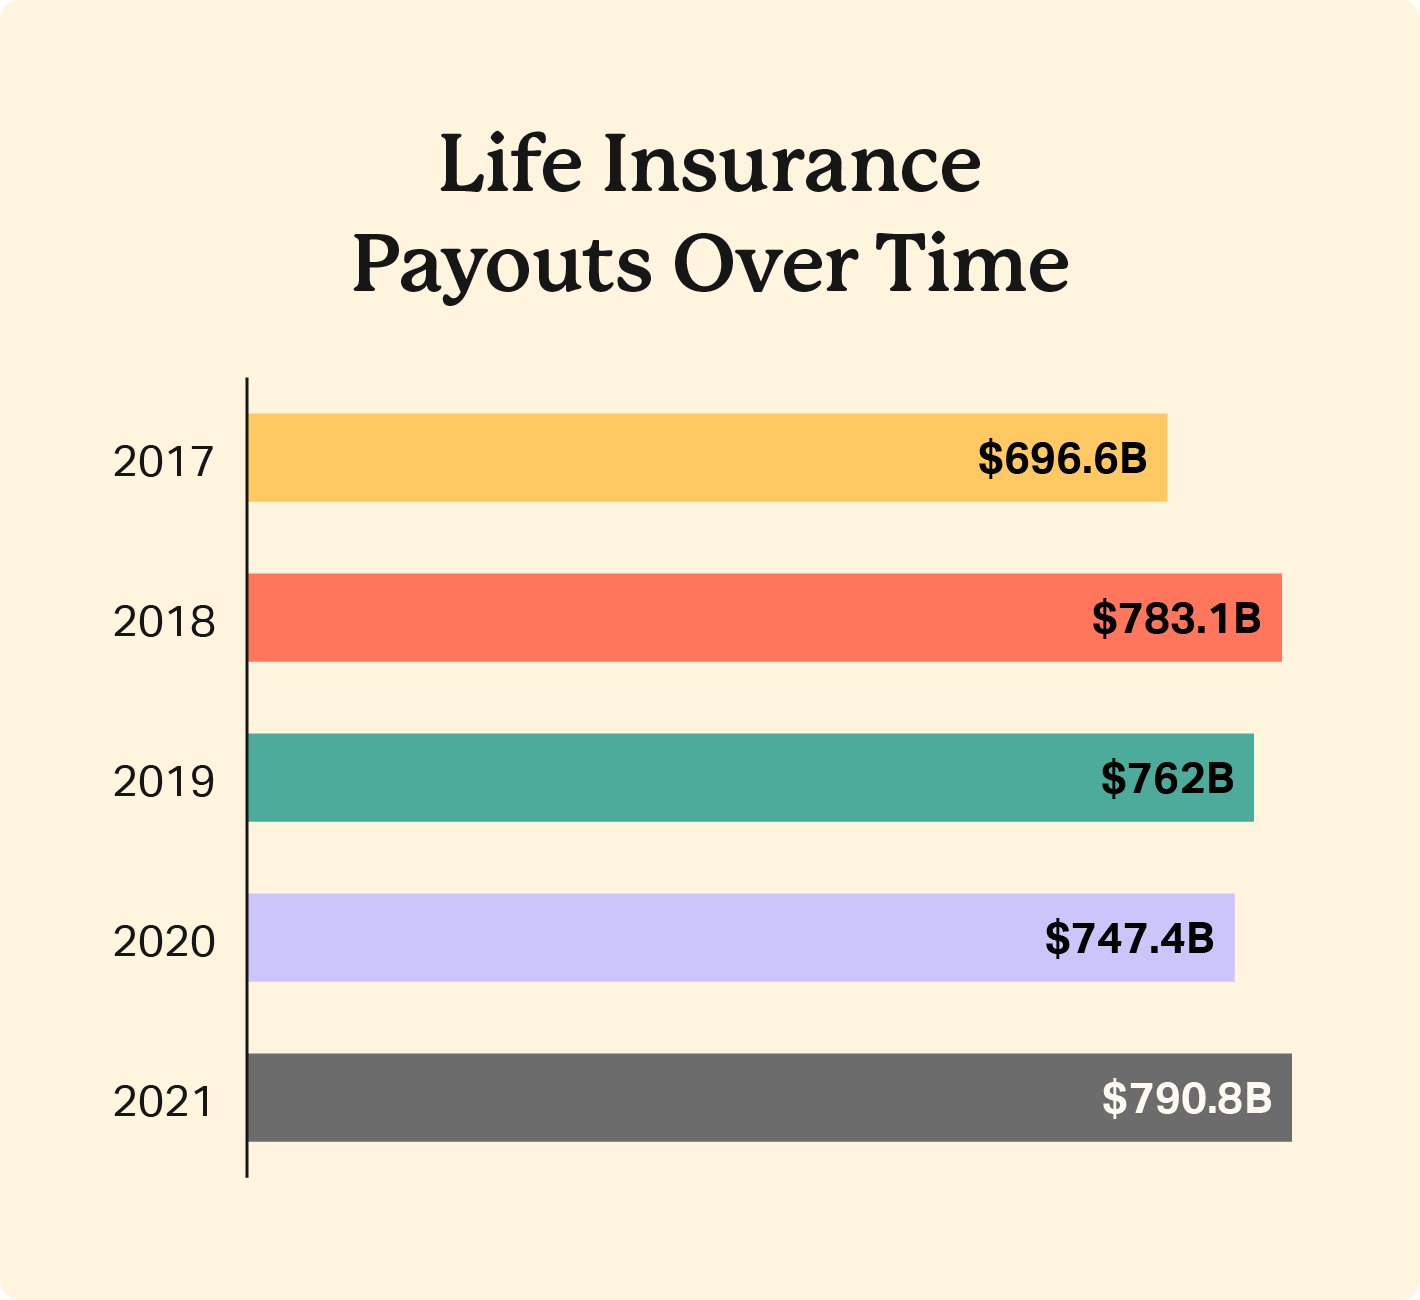 A bar graph compares life insurance payout totals by year, indicating a stead increase to $790.8B in 2021.